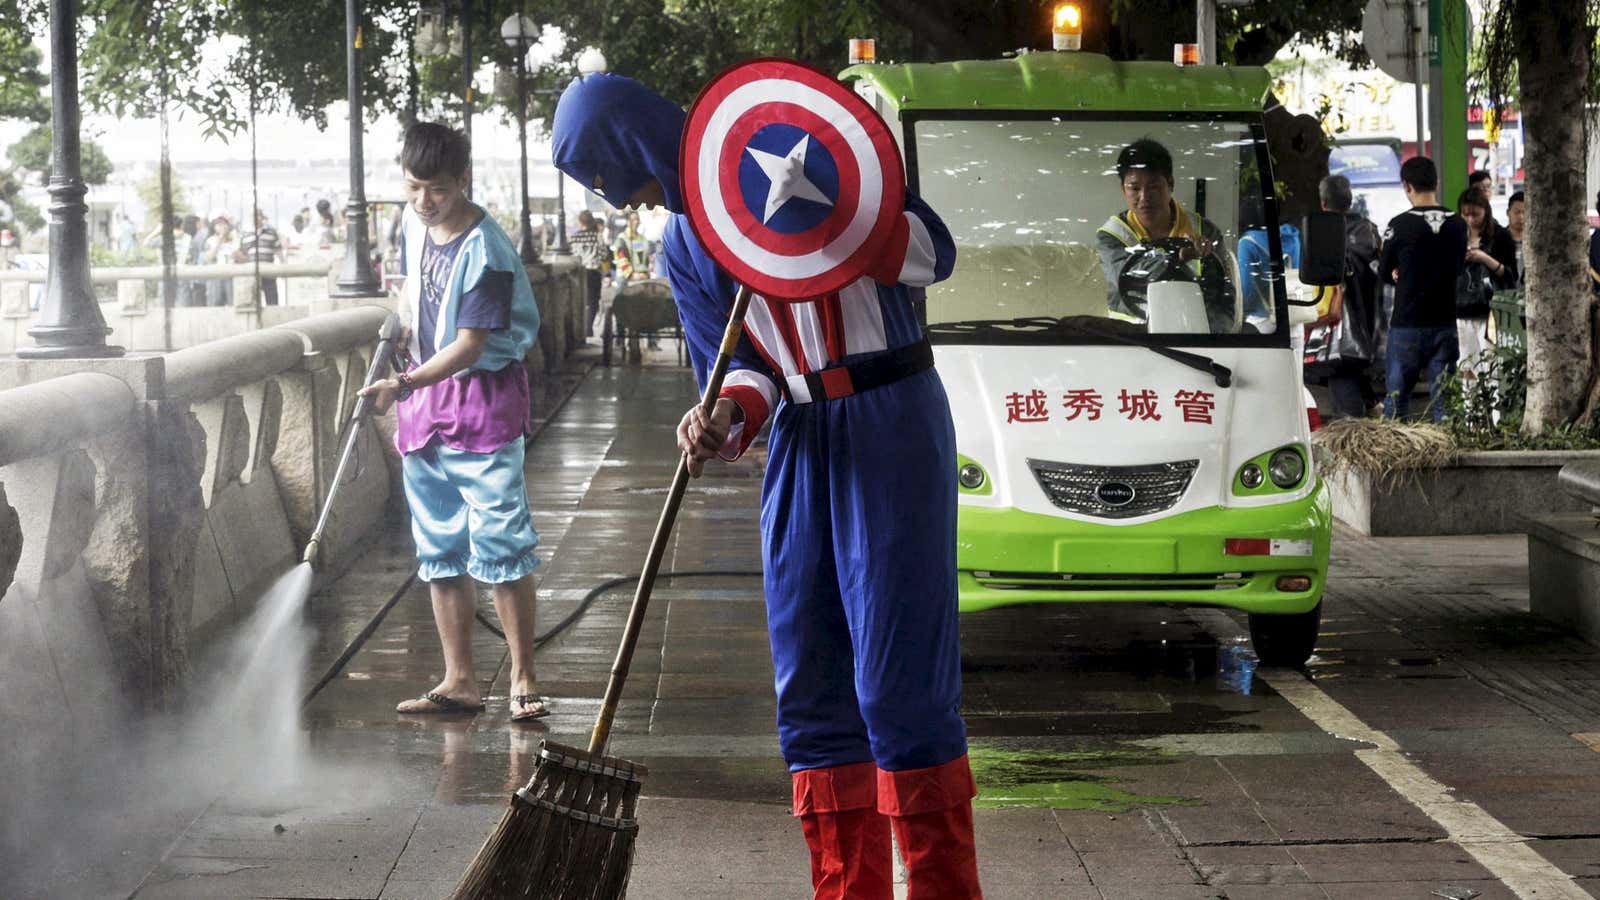 A student dressed as Captain America sweeping a street in Guangzhou.